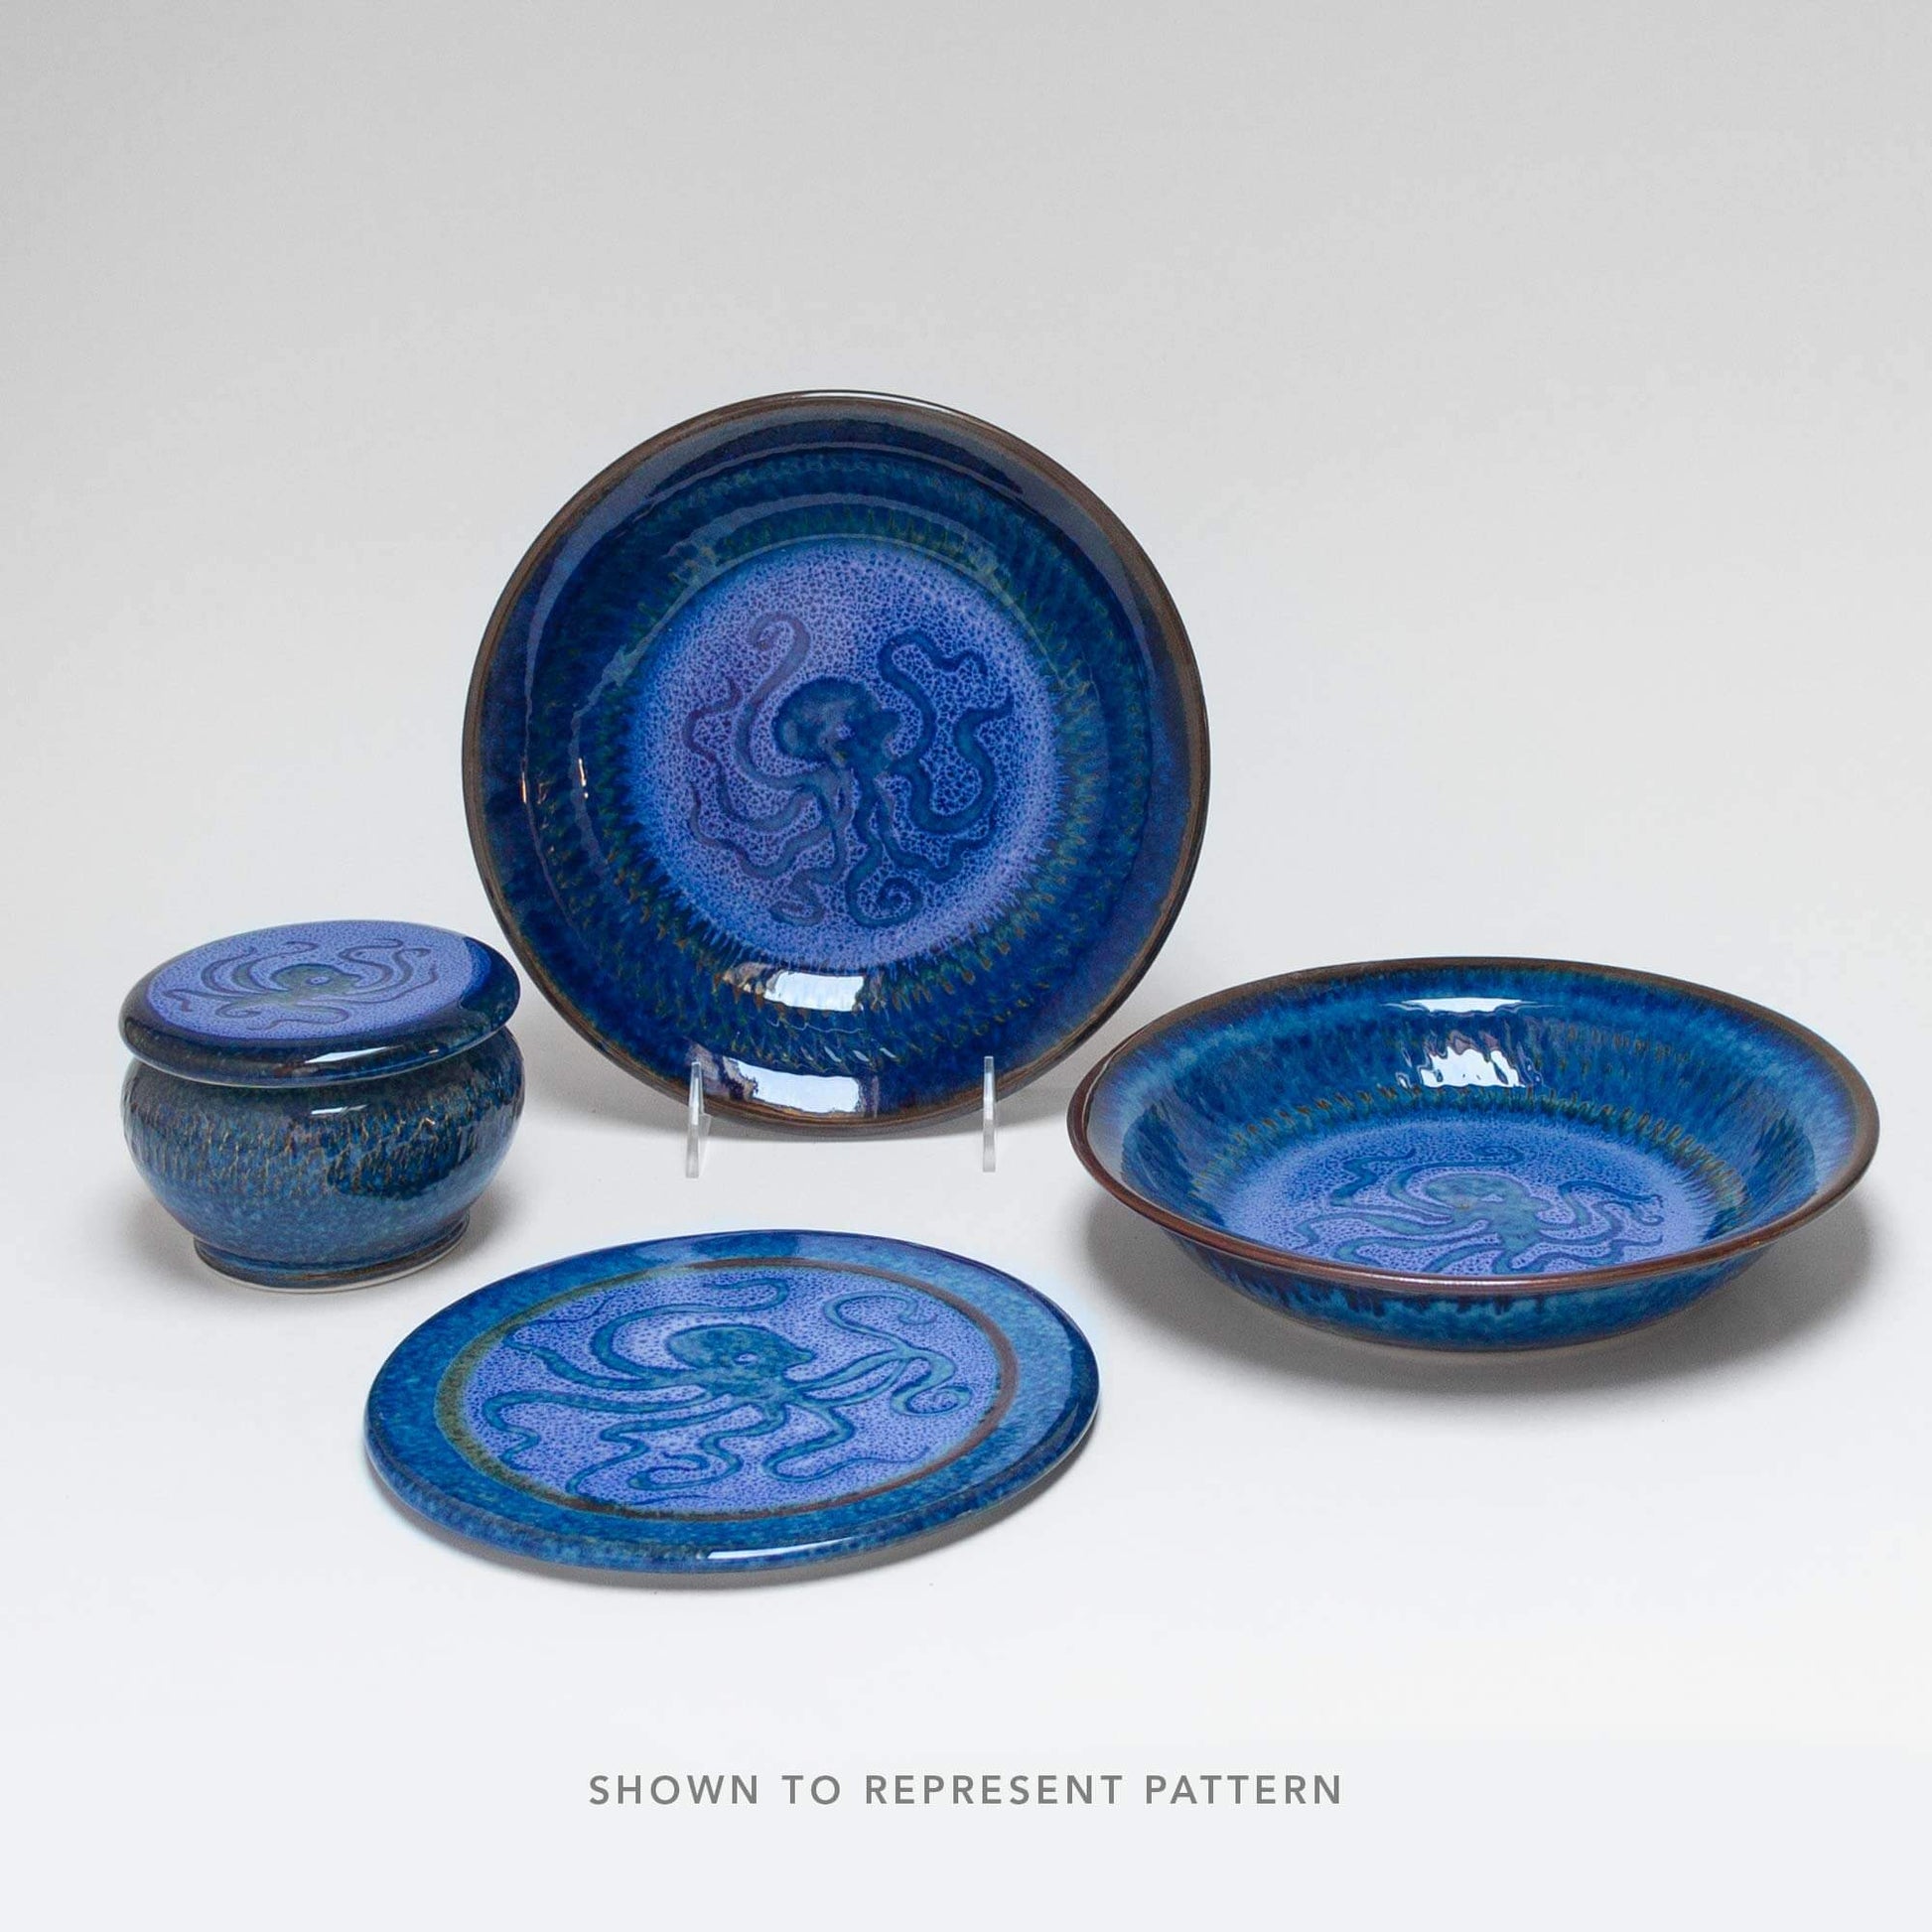 Handmade Pottery Serving Pasta Bowl in Blue Octopus pattern made by Georgetown Pottery in Maine